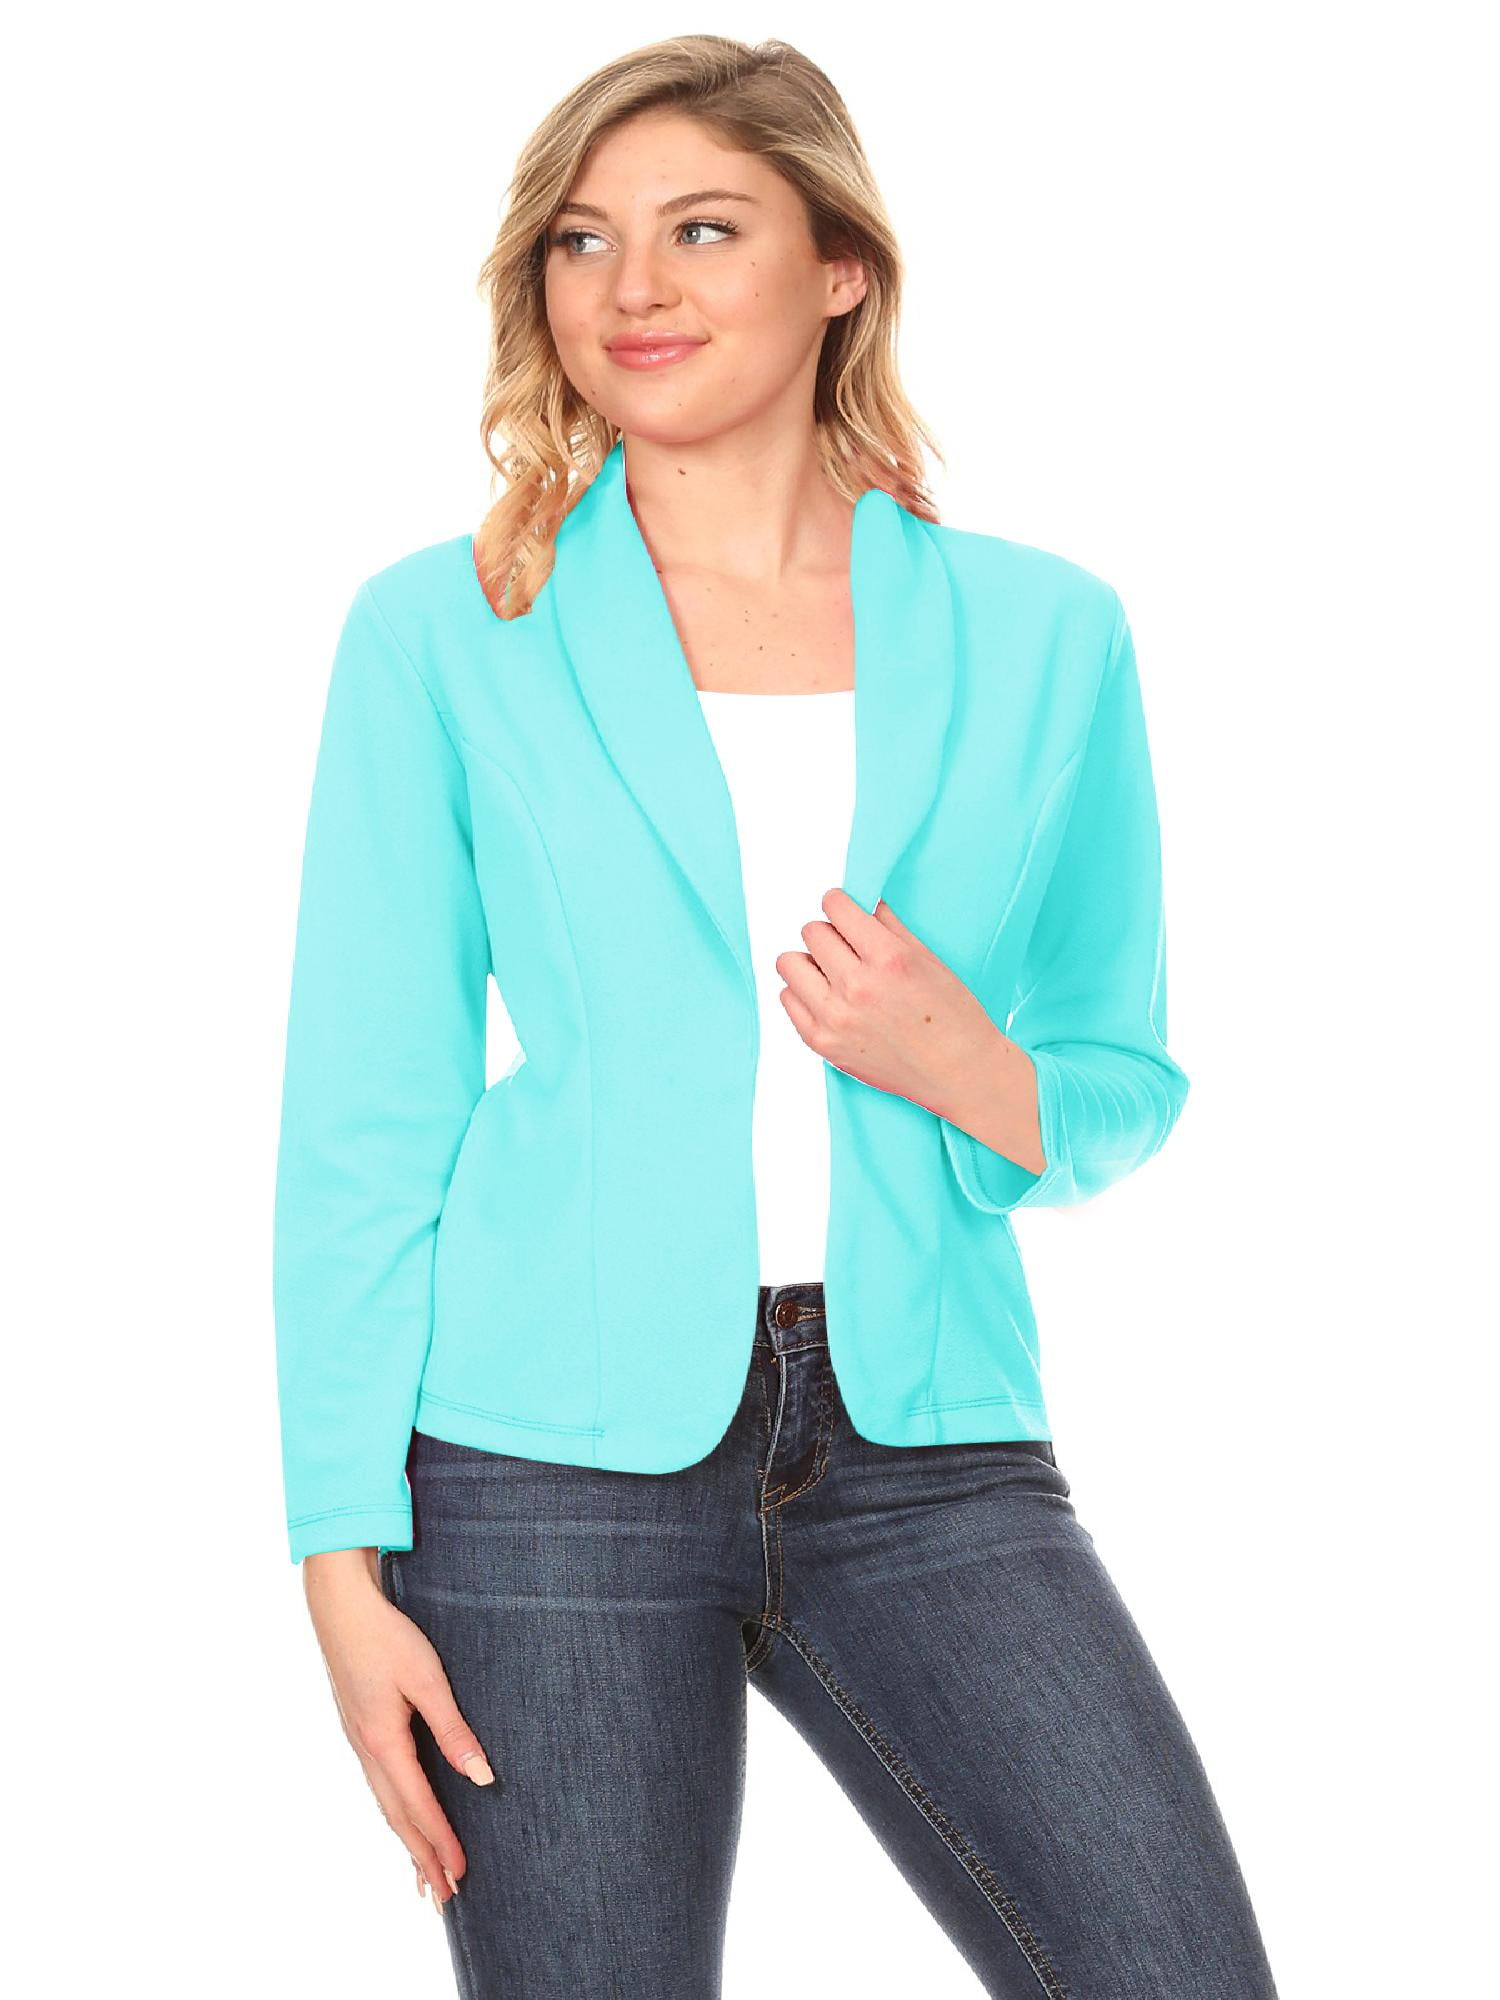 Moa Collection Women's Solid Casual Office Work Long Sleeve Open Front Blazer Jacket